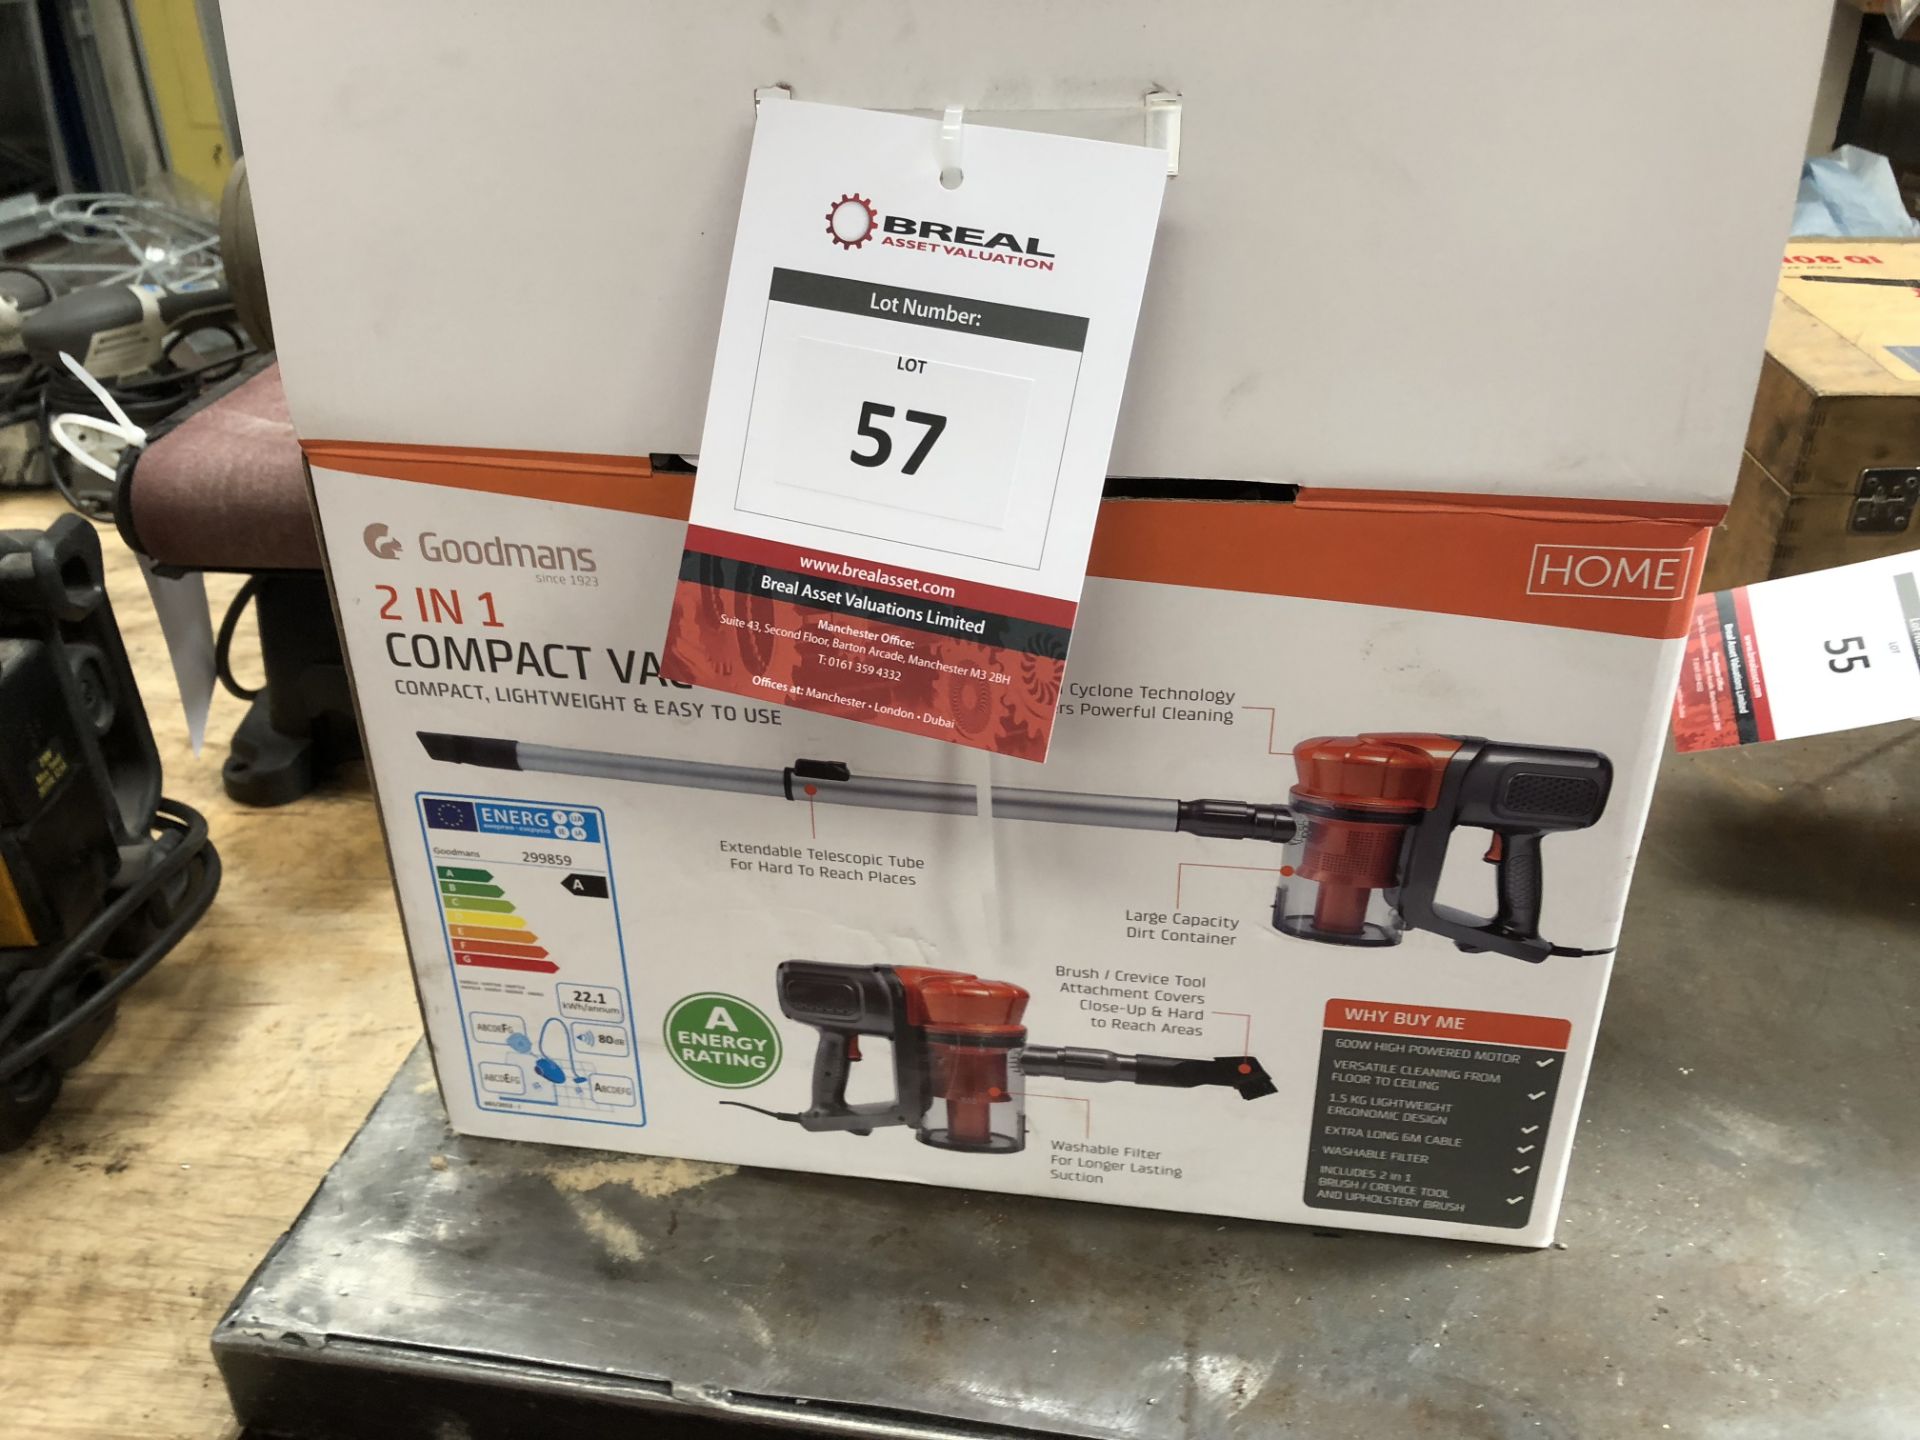 Goodmans 2 in 1 Compact Vac